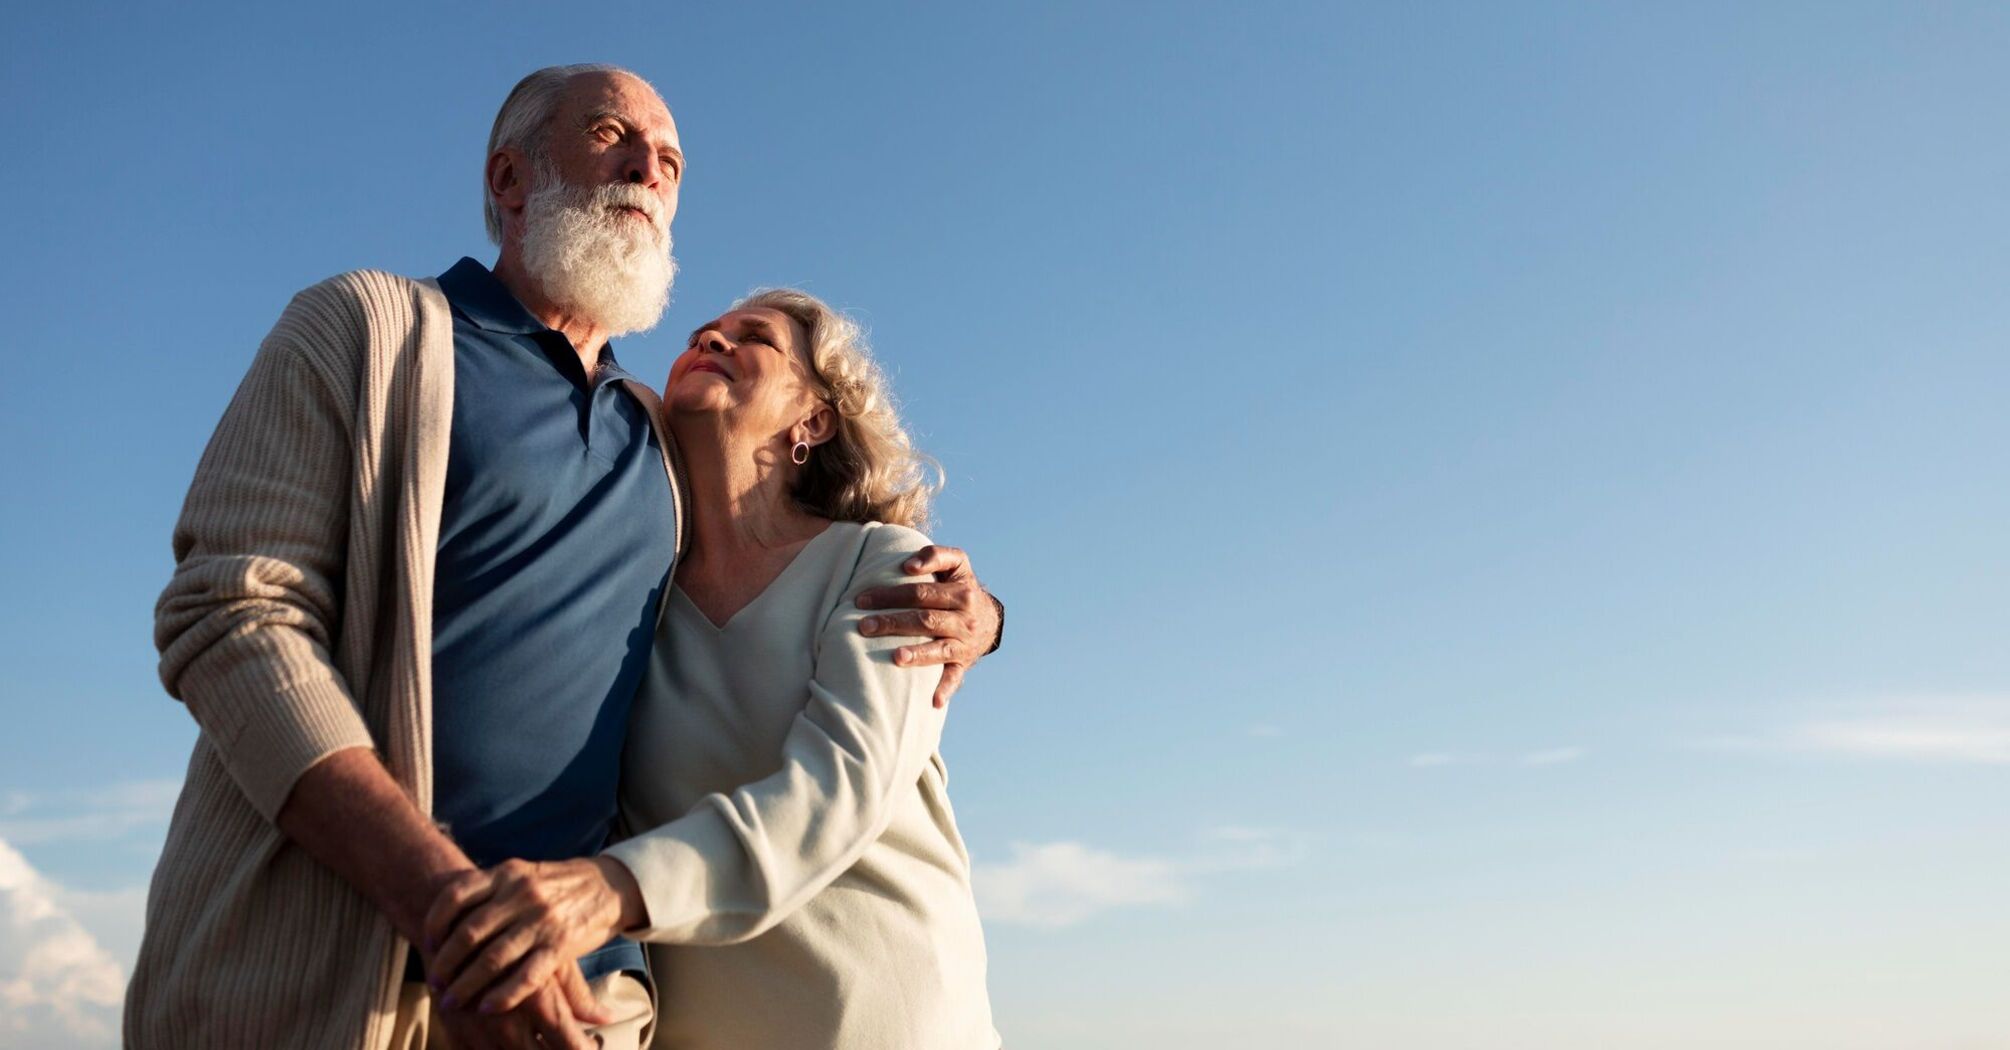 Best places for retirement: Benefits and opportunities